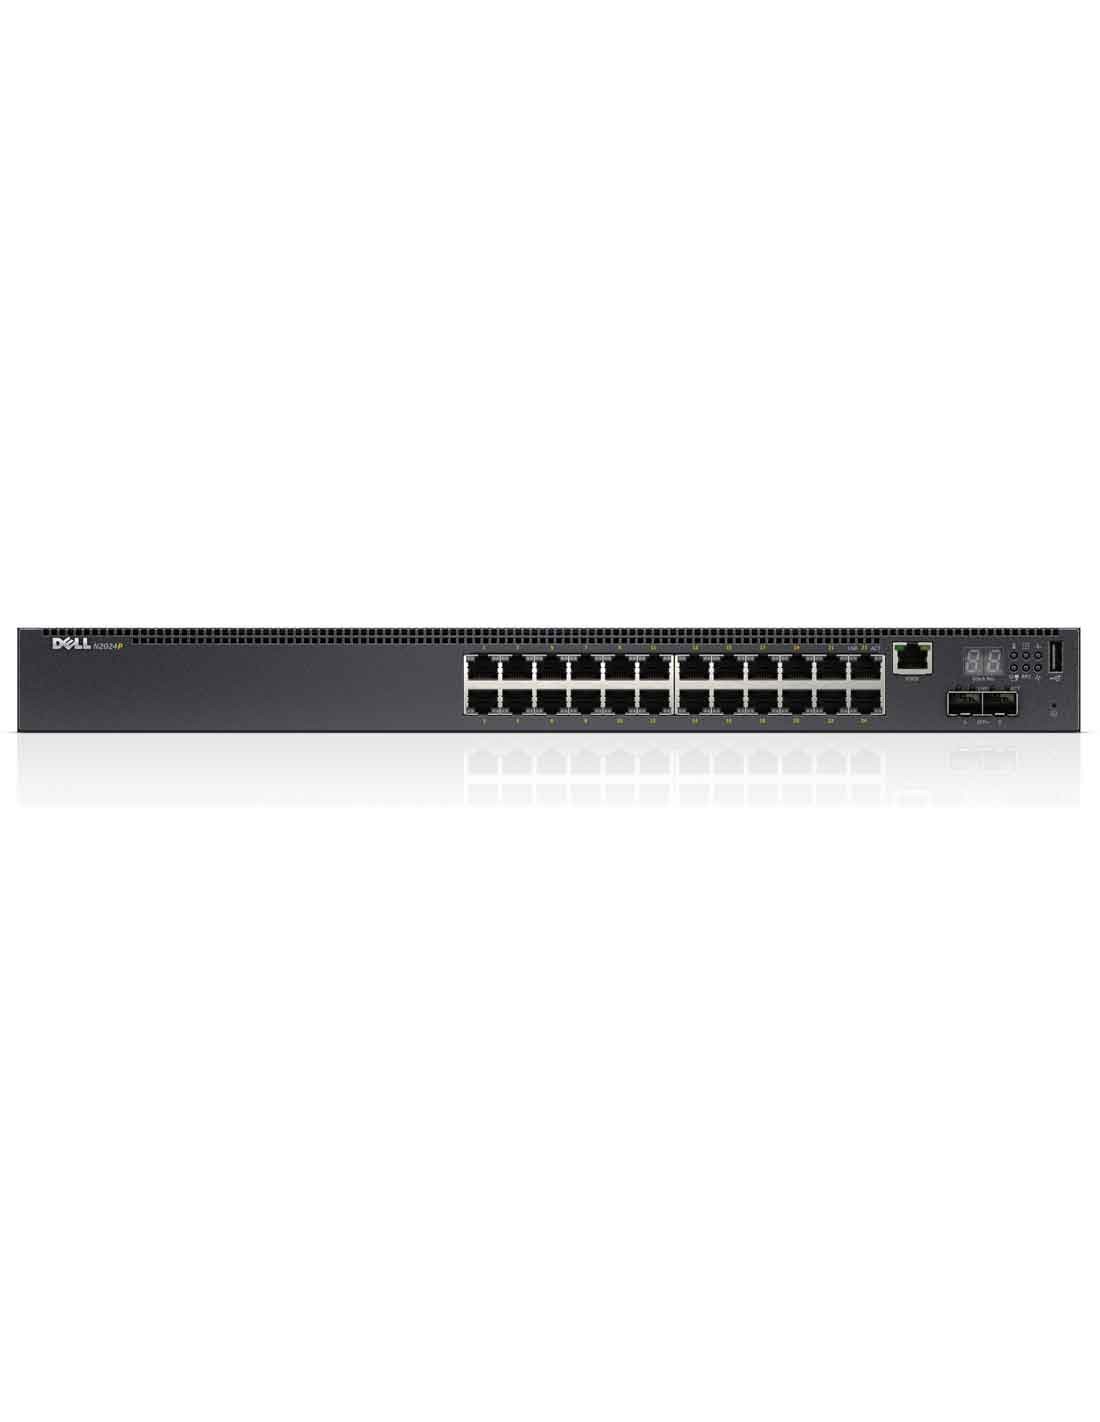 Dell Networking N2024P Switch at a cheap price in Dubai computer store